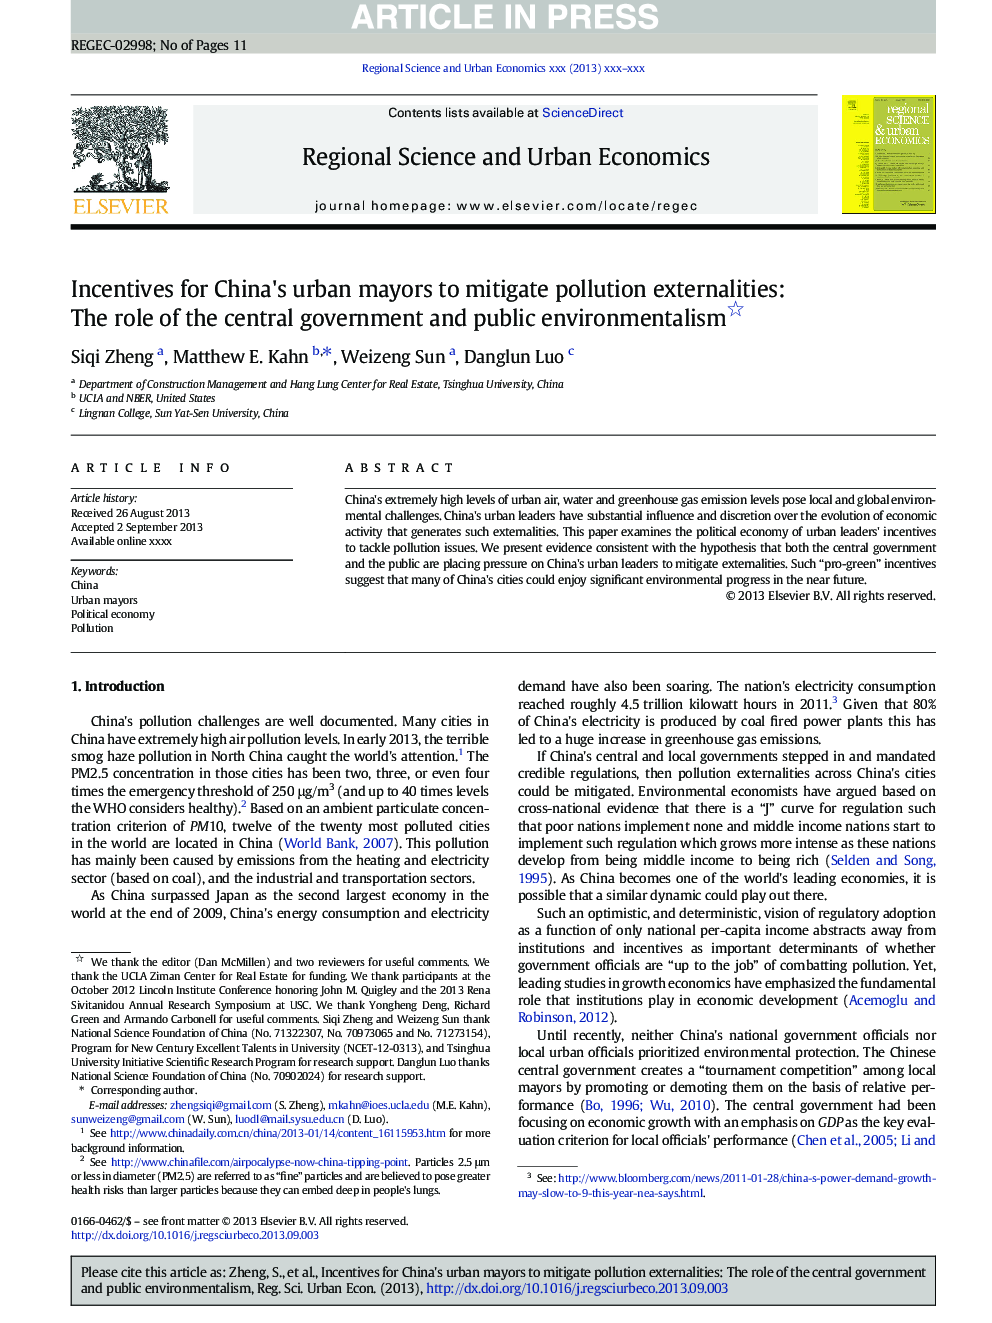 Incentives for China's urban mayors to mitigate pollution externalities: The role of the central government and public environmentalism